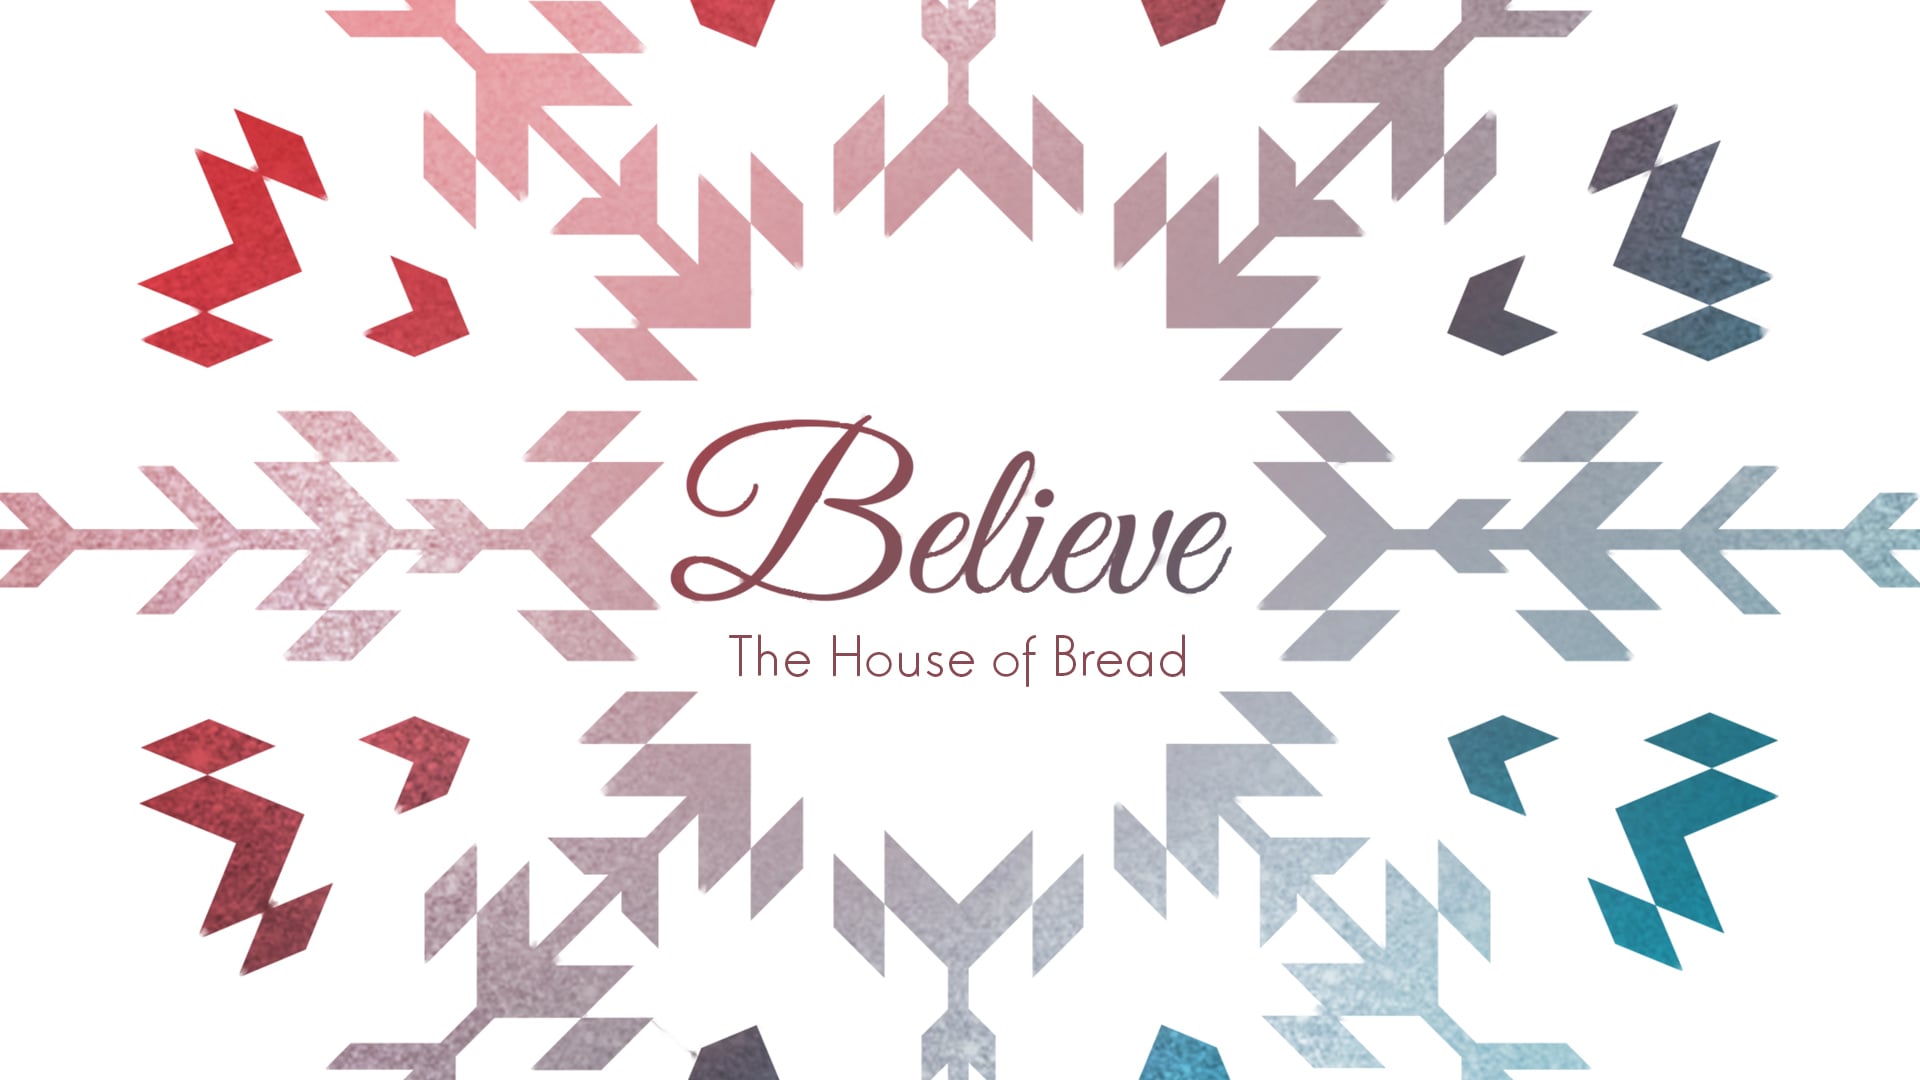 The House of Bread